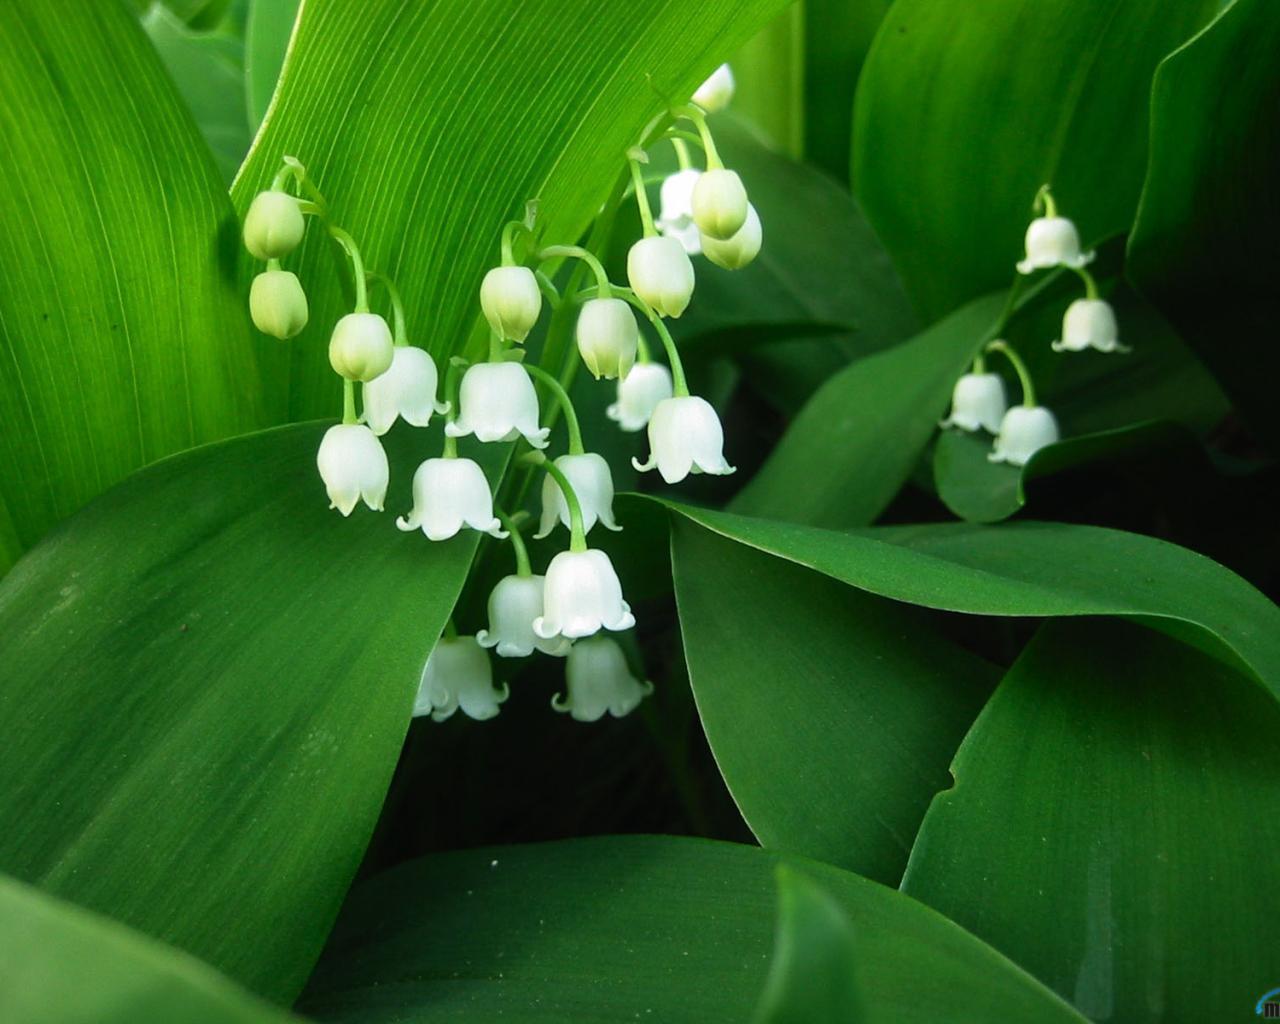 lily of the valley, plants, flowers, green UHD